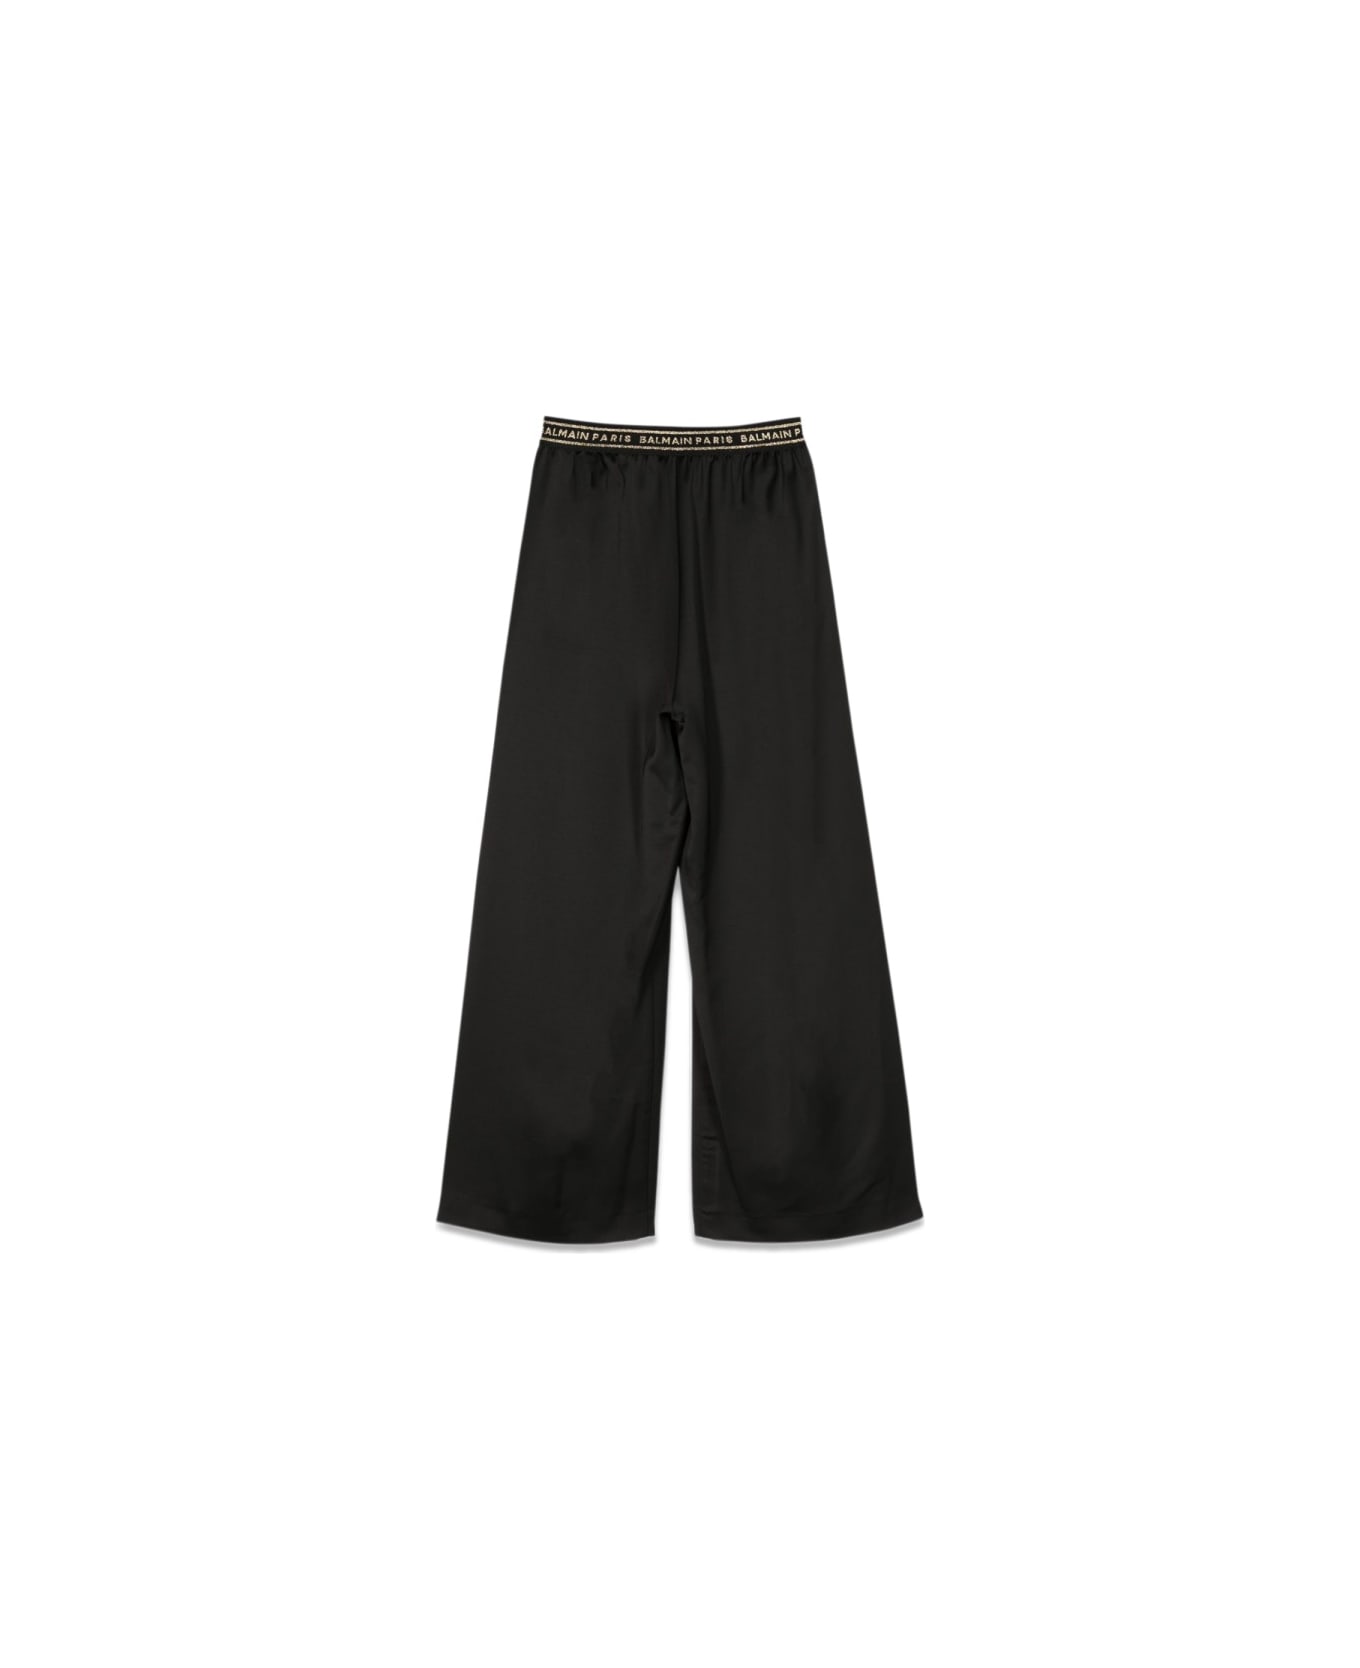 Balmain Pants With Buttons - BLACK ボトムス